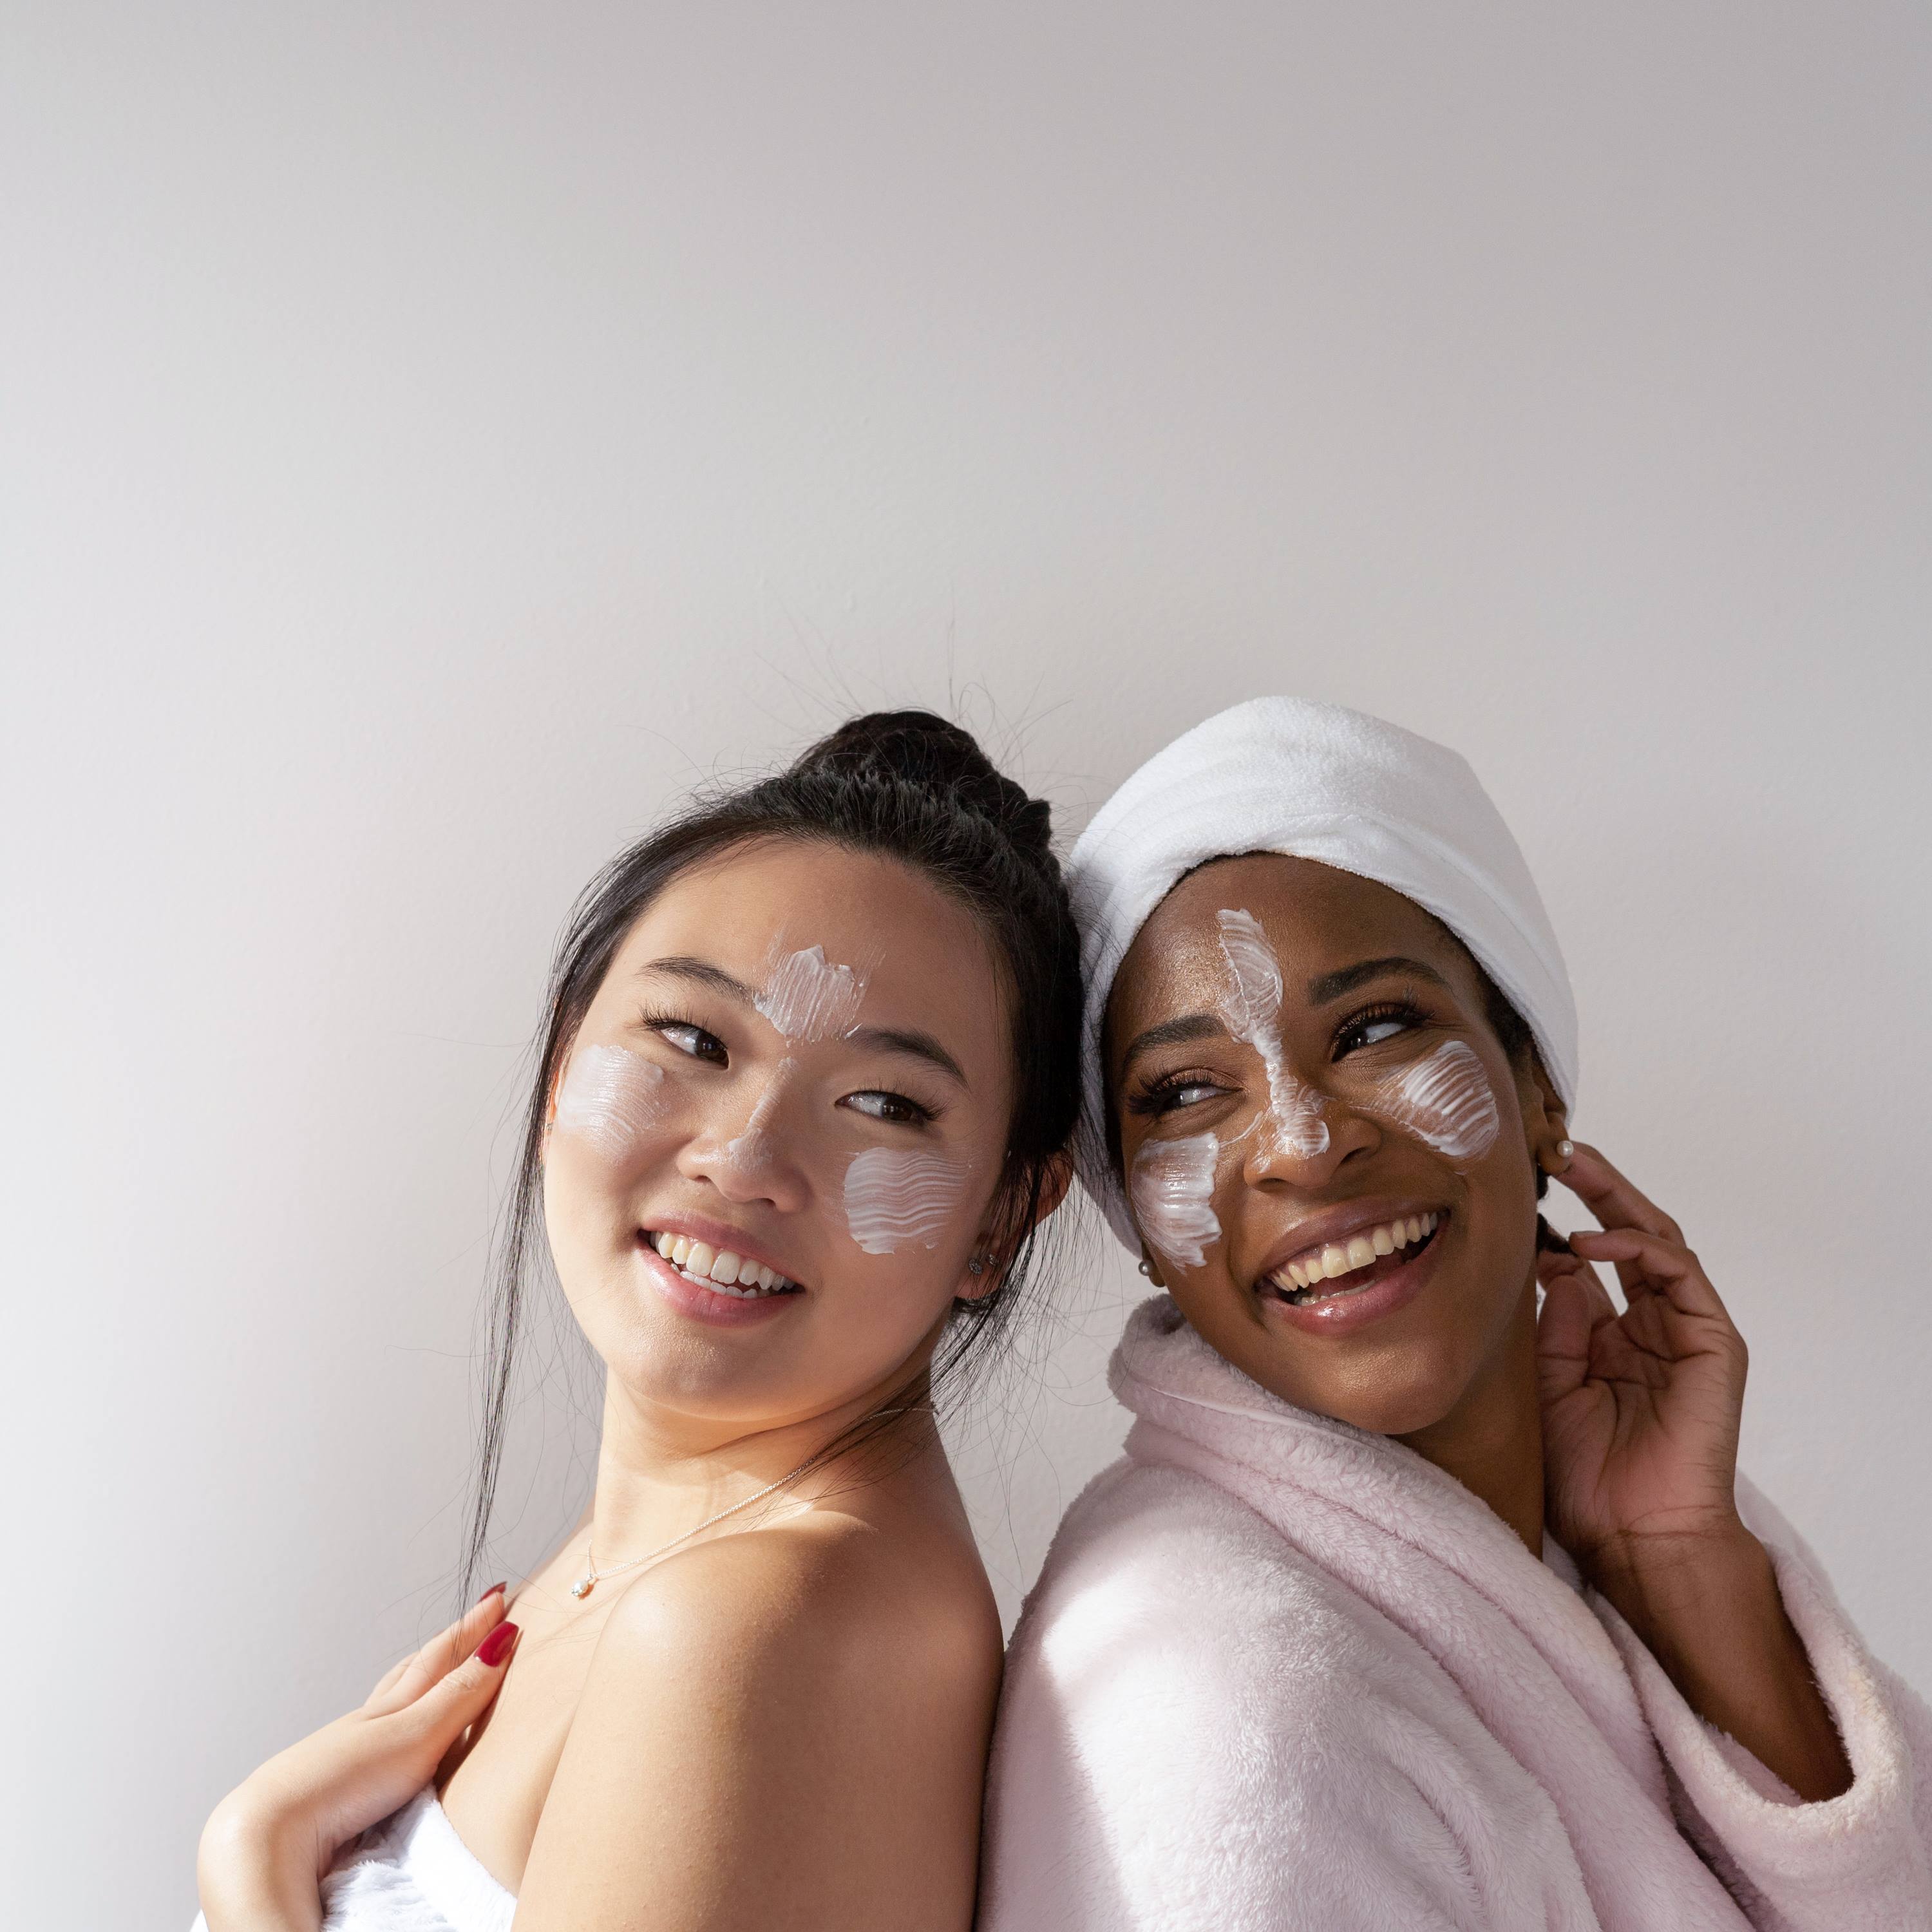 An Asian lady and a black lady having a spa moment with smiles on their faces